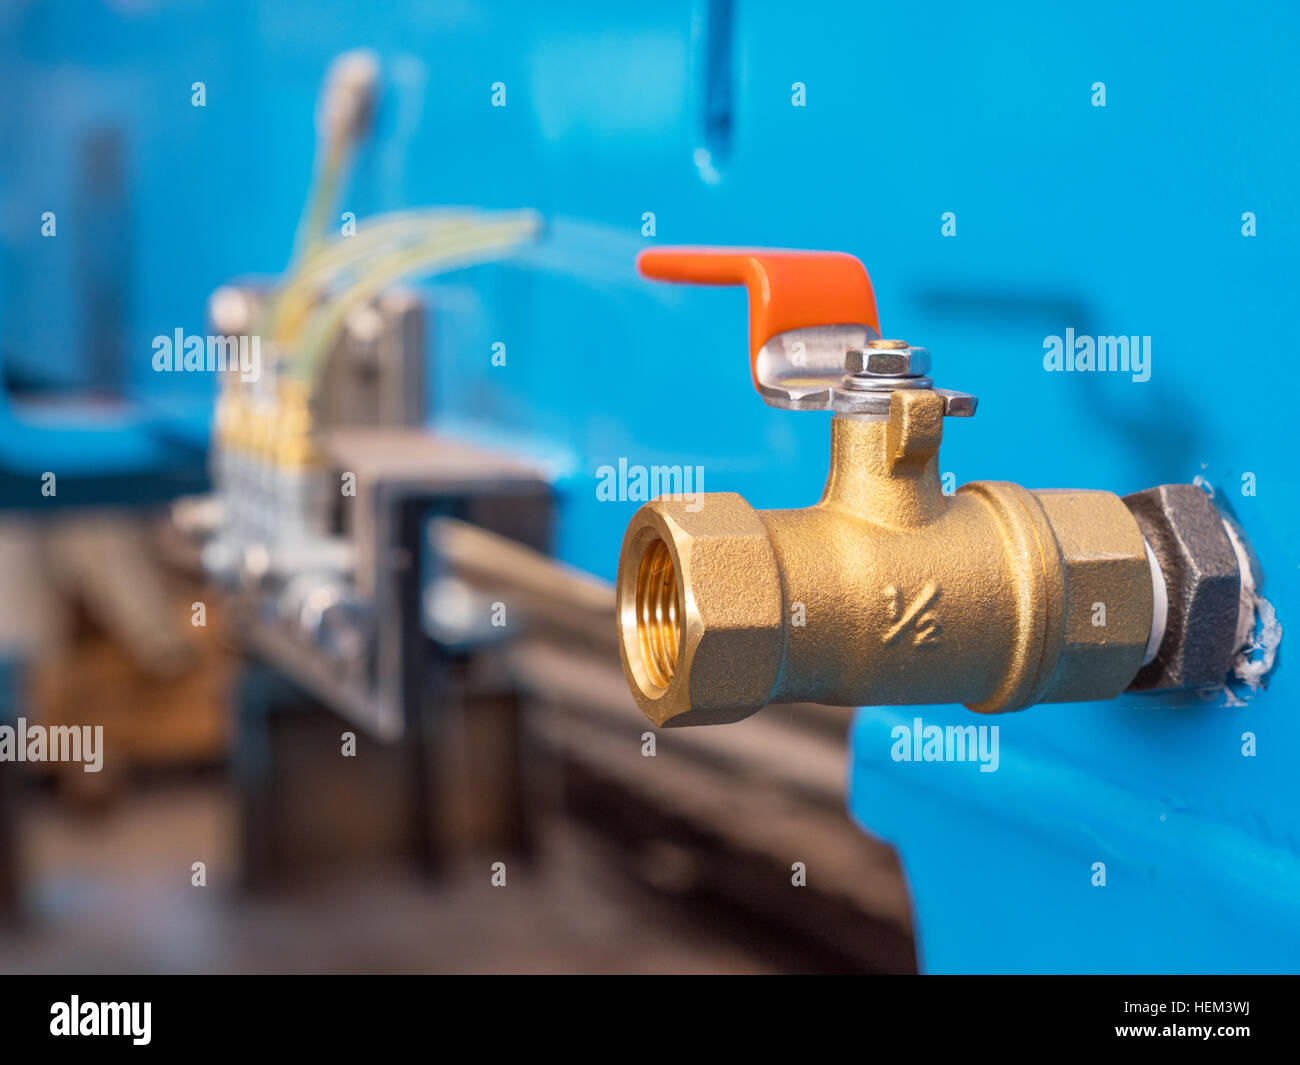 Half inch brass ball valve in industrial setting. Shallow depth of field with the valve in focus. Stock Photo